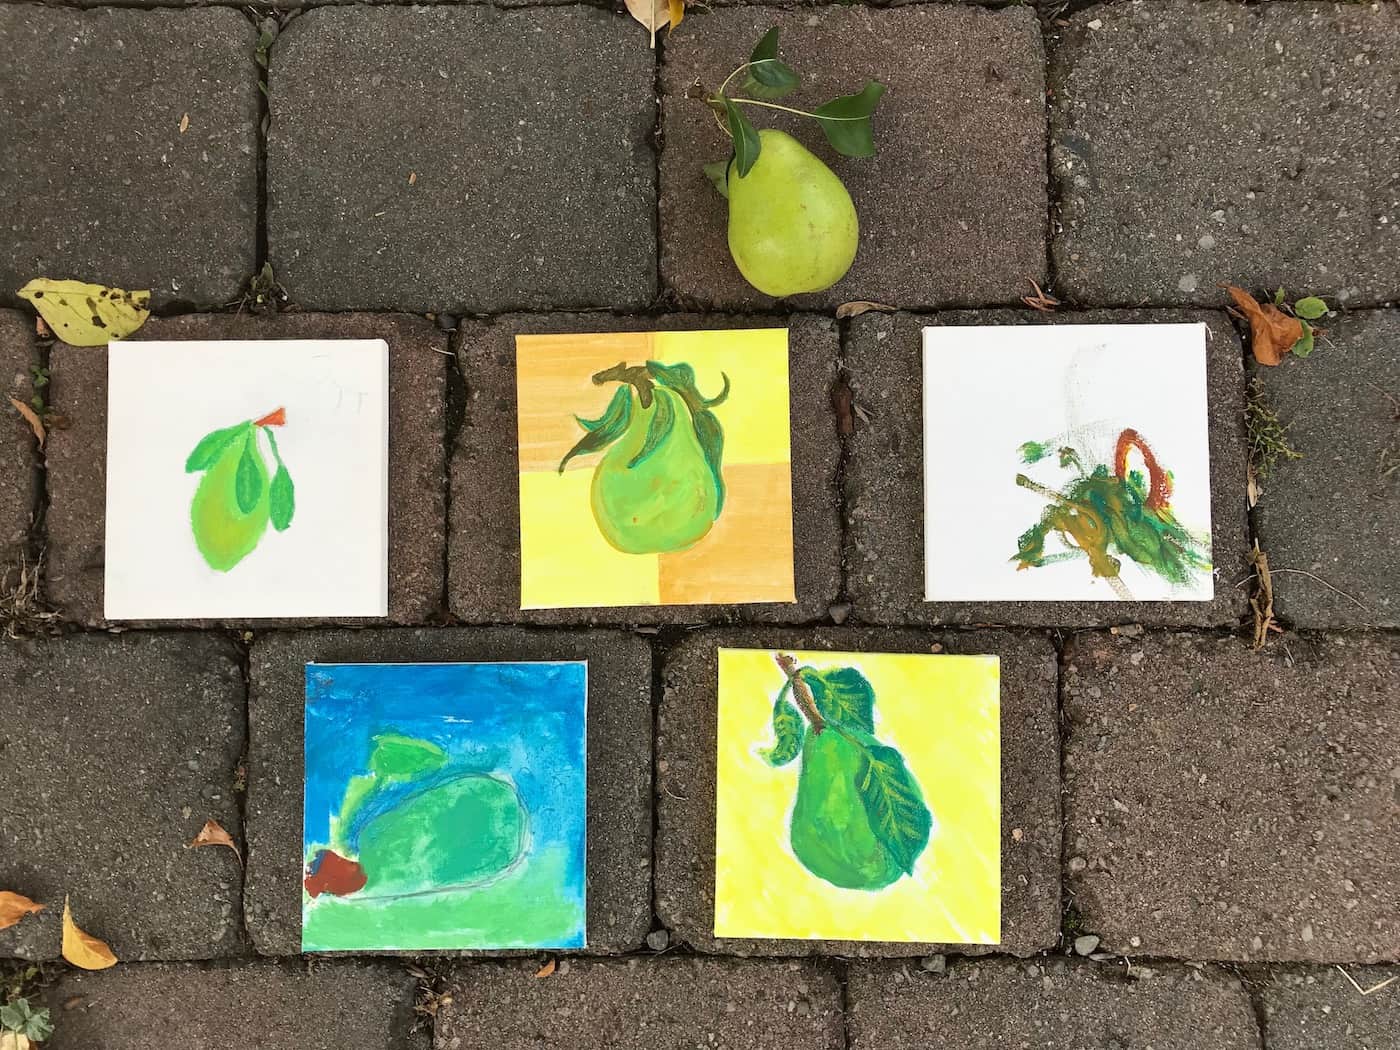 Kids crafts using all the extra pears we have right now